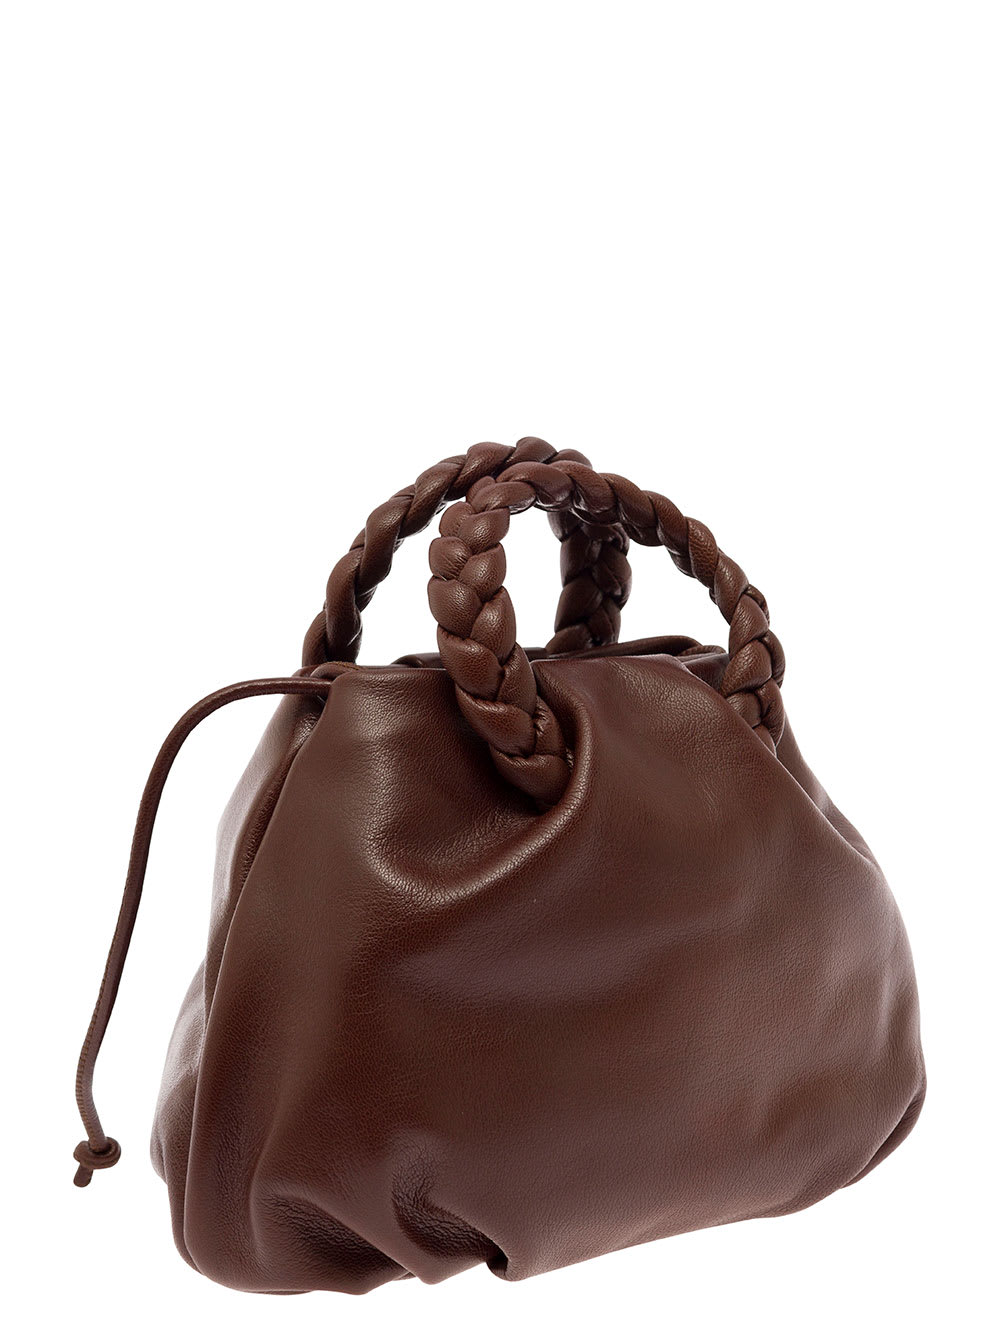 Shop Hereu Bombon M Brown Handbag With Braided Handles In Shiny Leather Woman